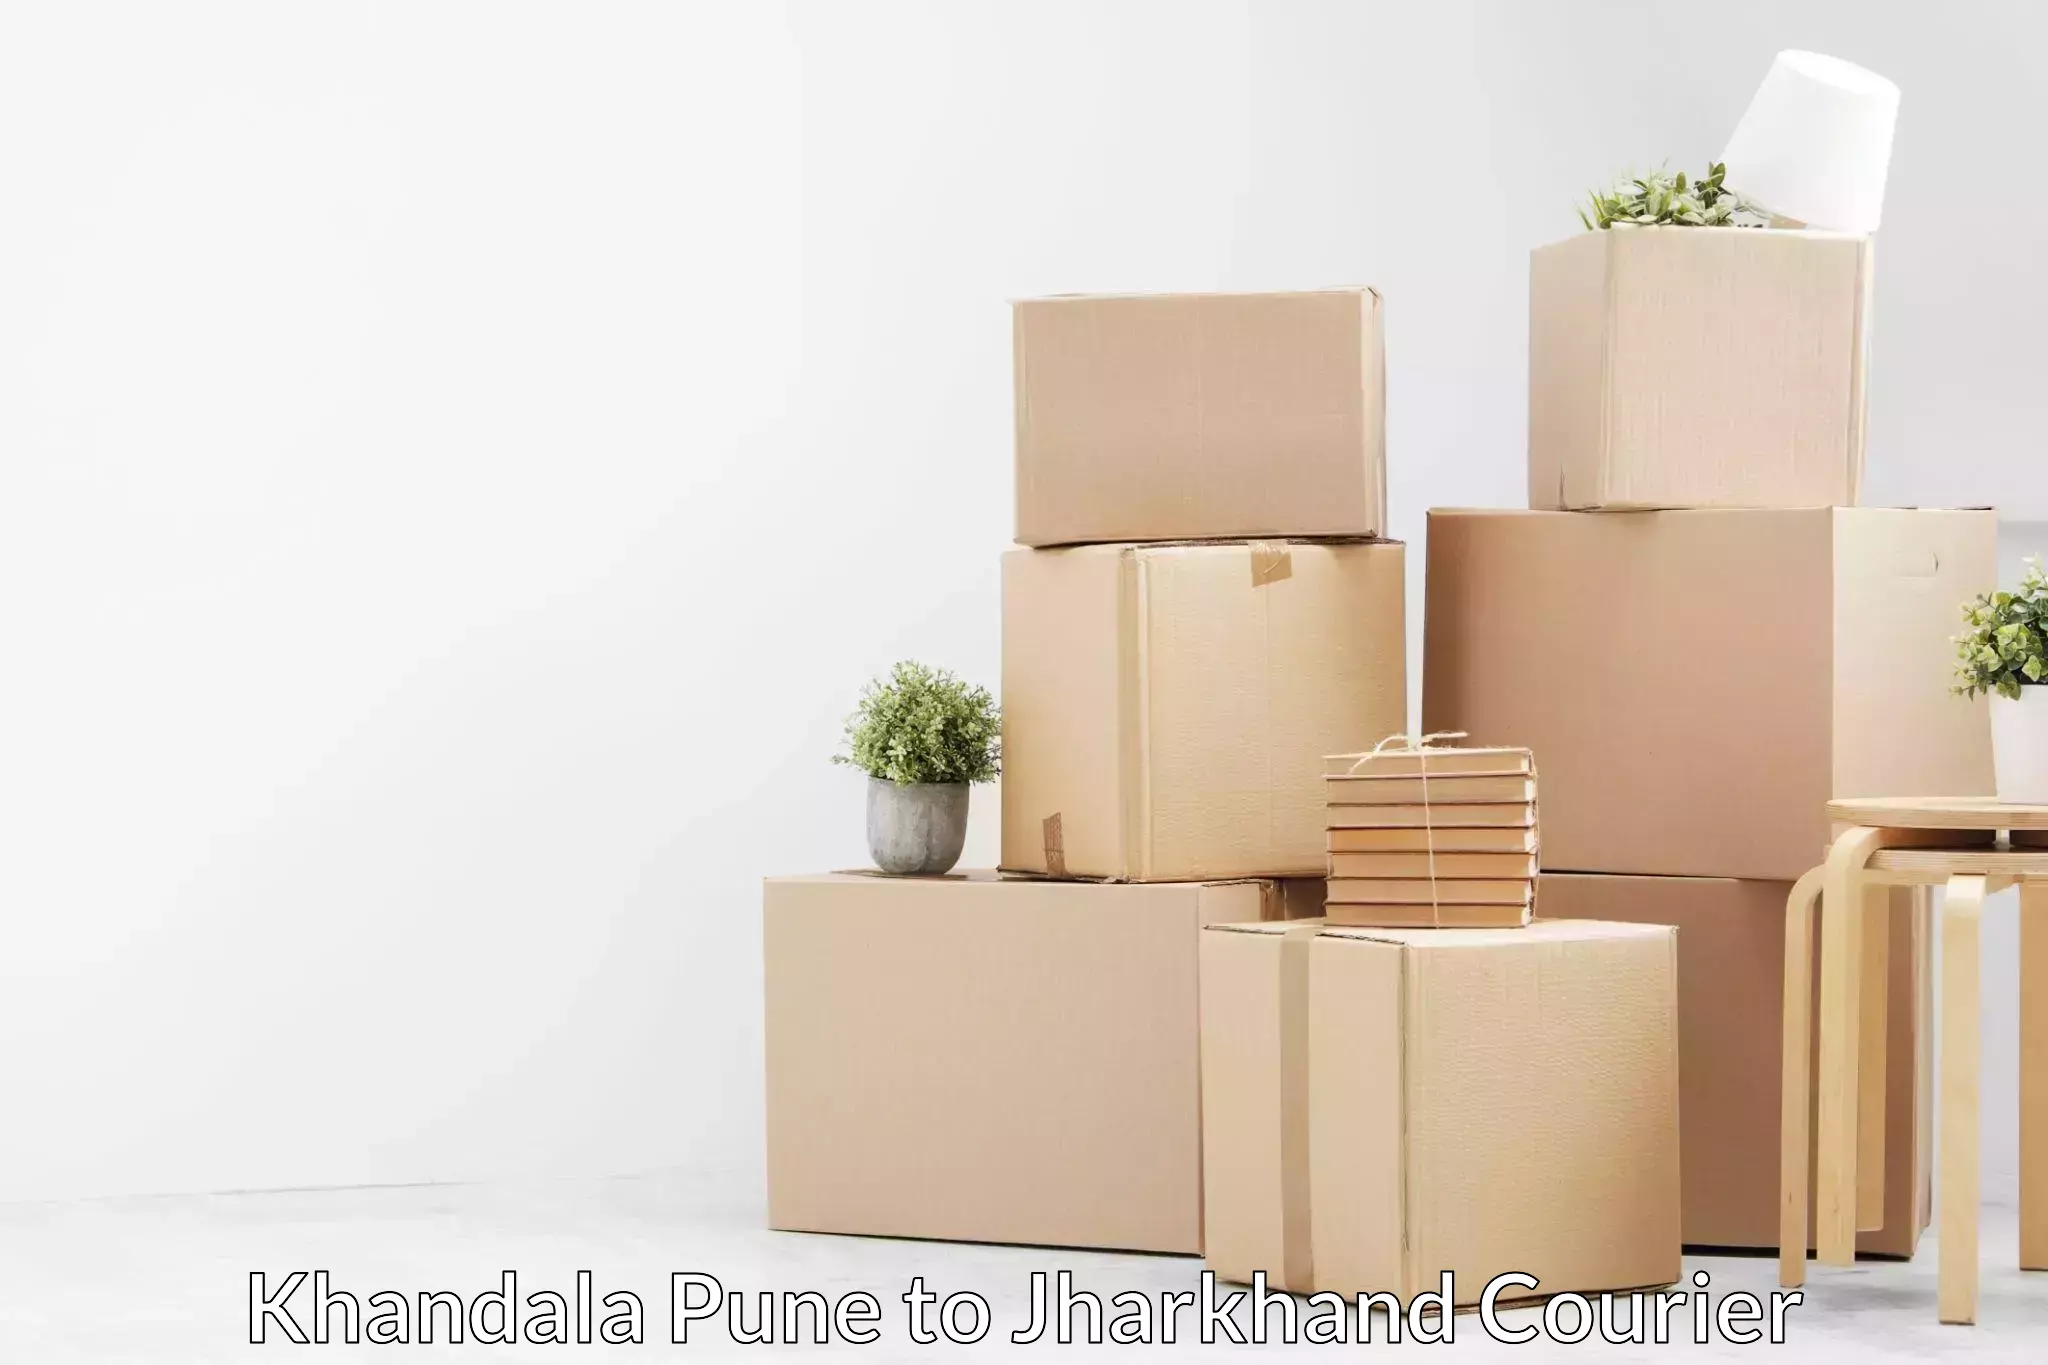 Quality relocation services Khandala Pune to Jharkhand